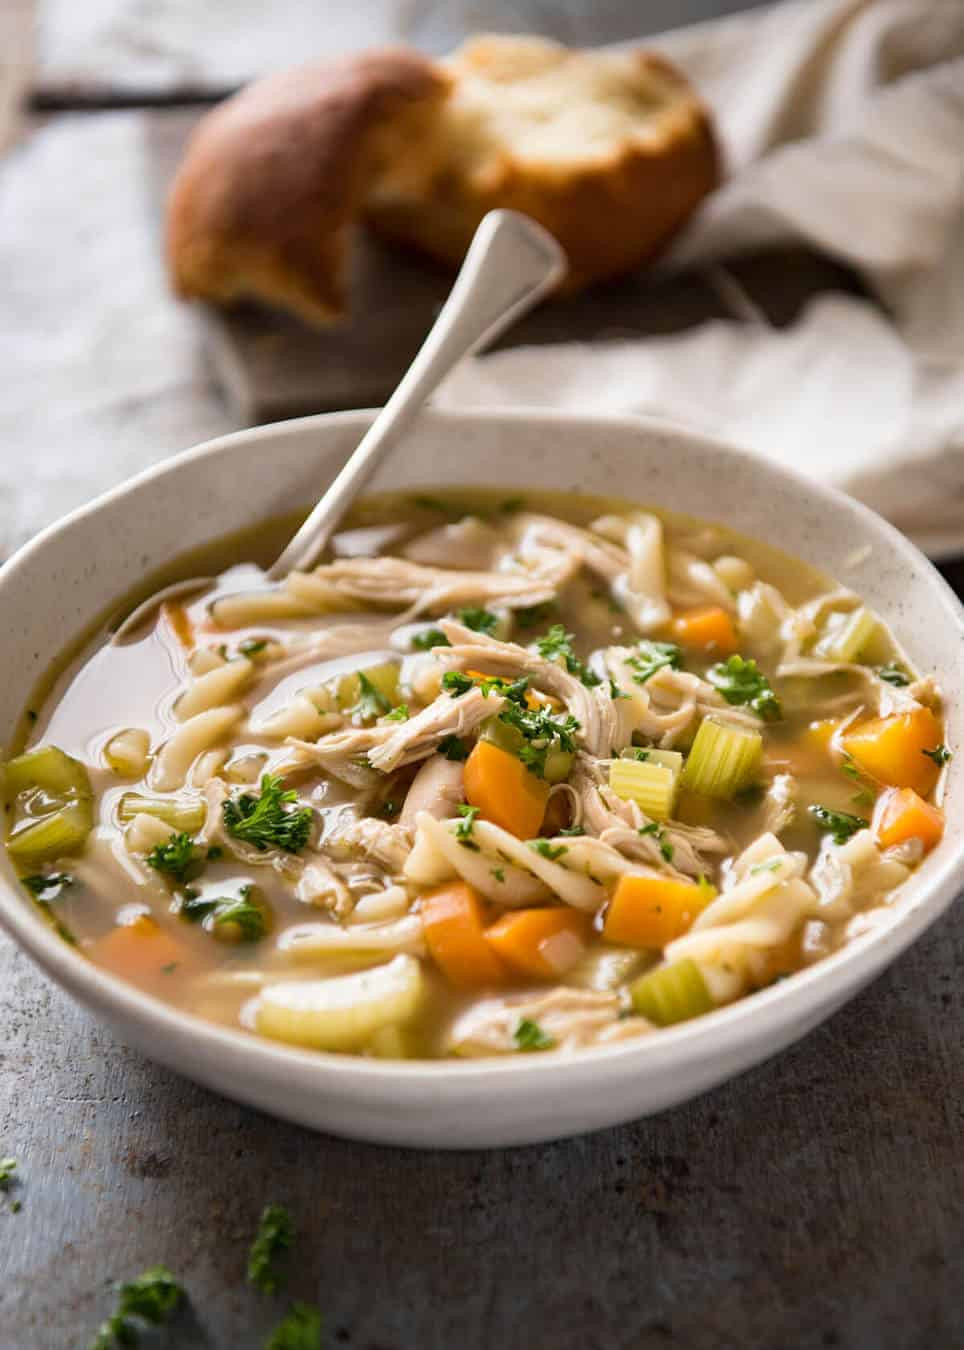 Chicken Noodle Soup Recipe From Scratch
 Homemade Chicken Noodle Soup From Scratch